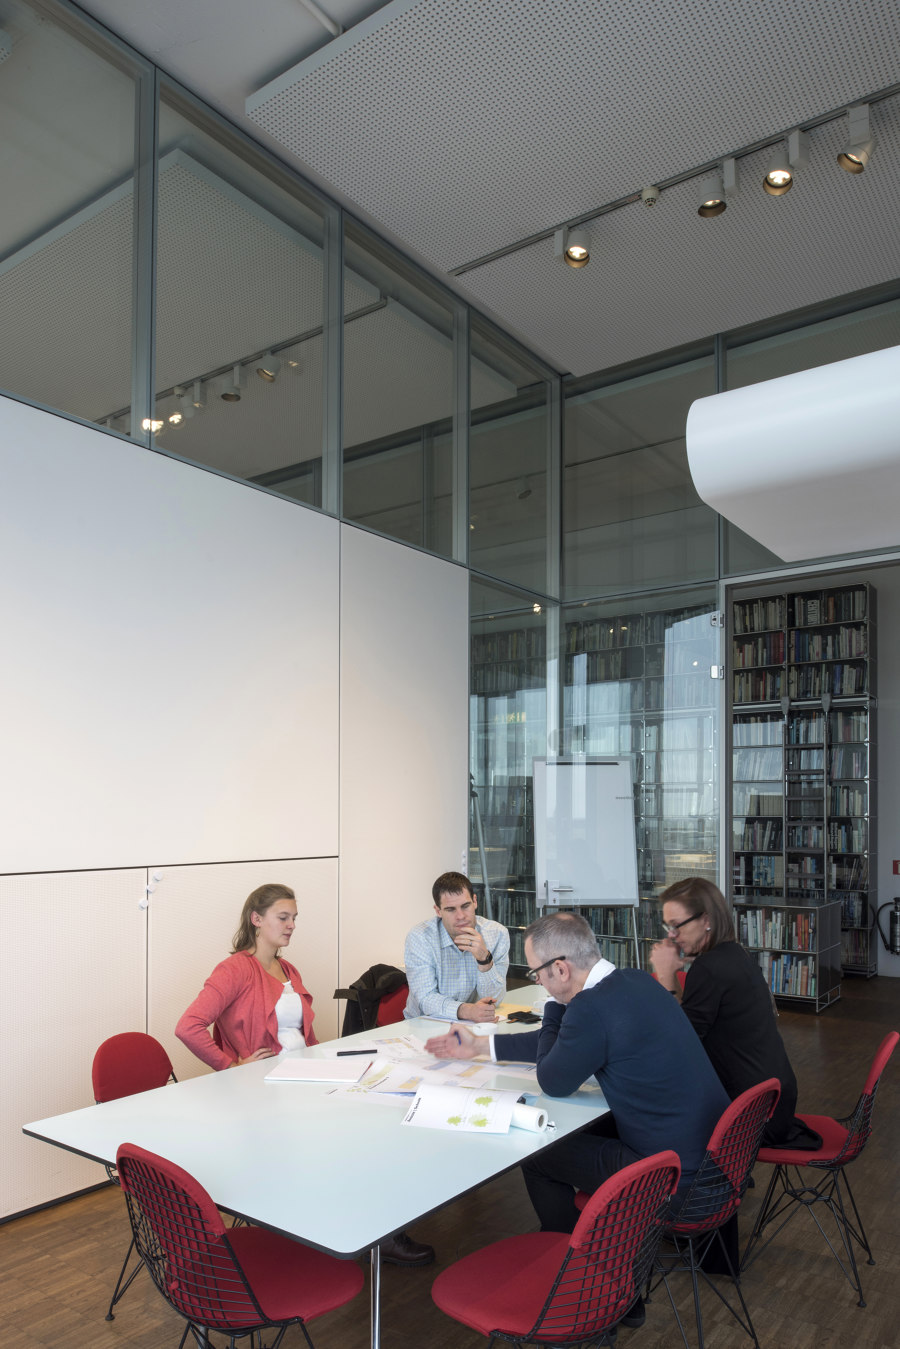 Efficient light for creative work: ERCO | Industry News